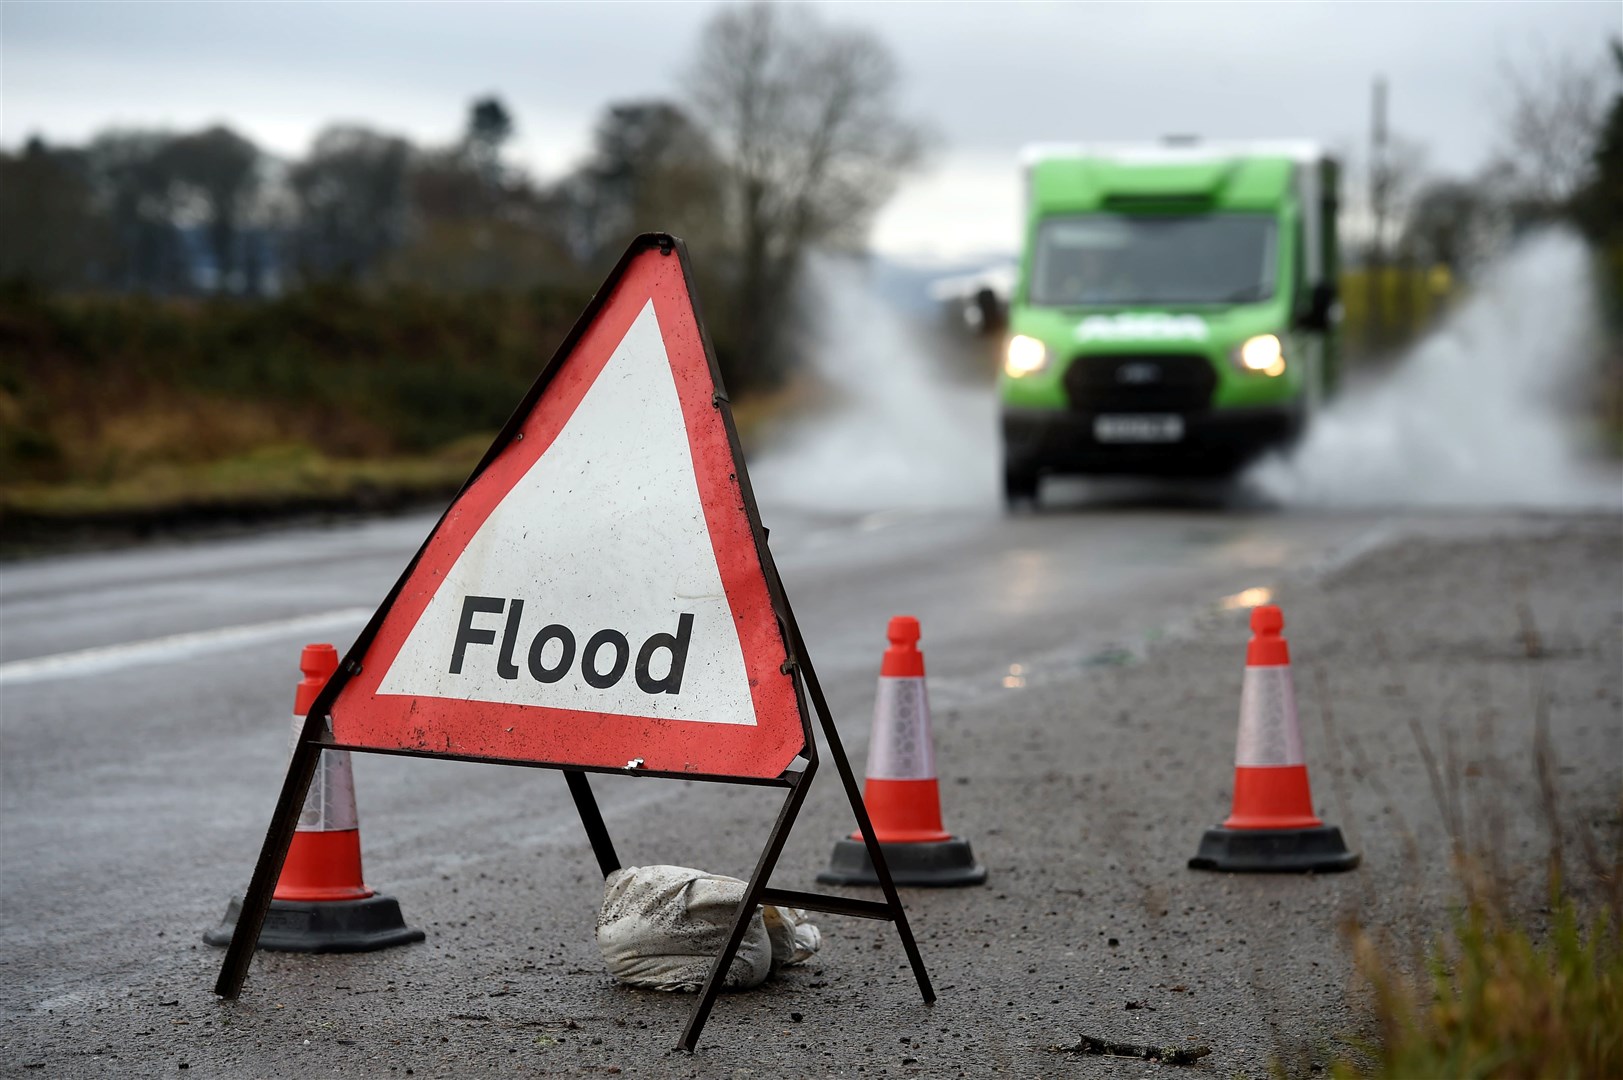 Flooding on A832 Tore to Muir of Ord road